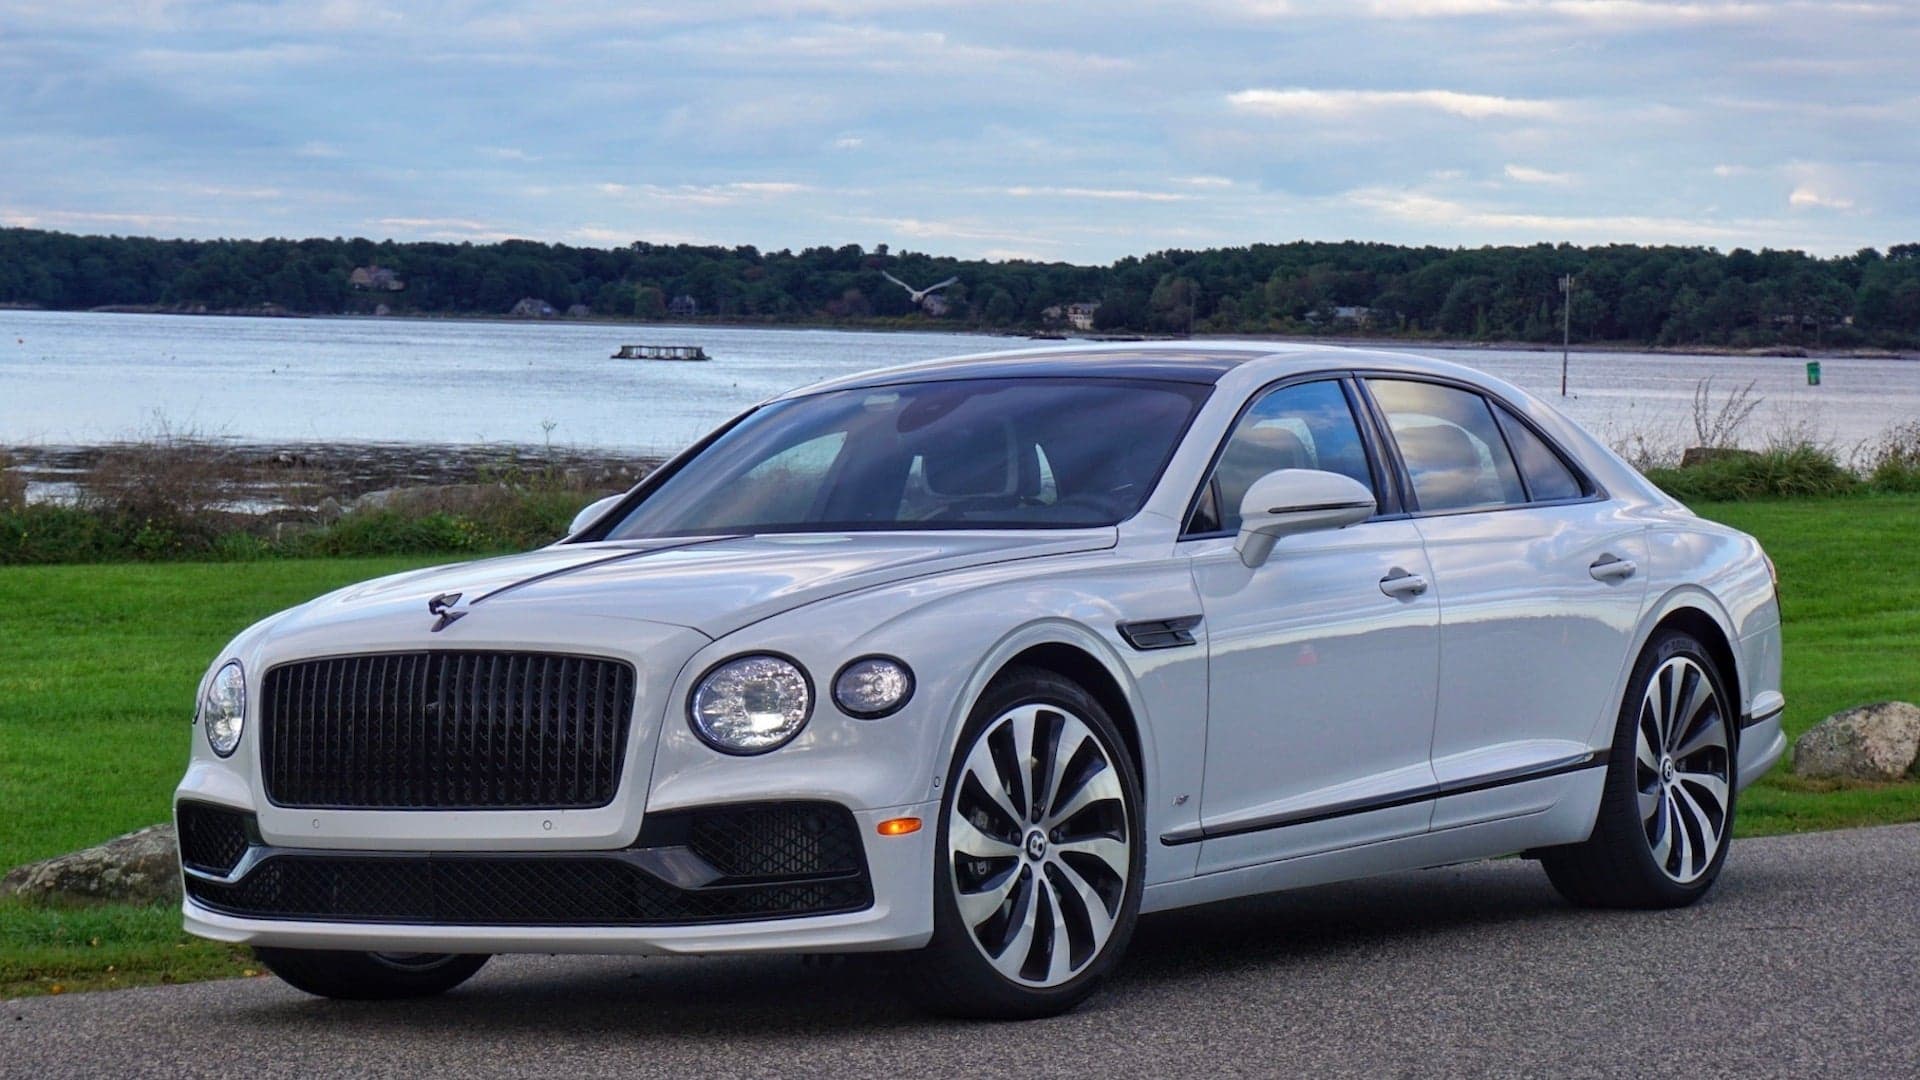 Making a Kid’s Birthday Dreams Come True in a 2021 Bentley Flying Spur